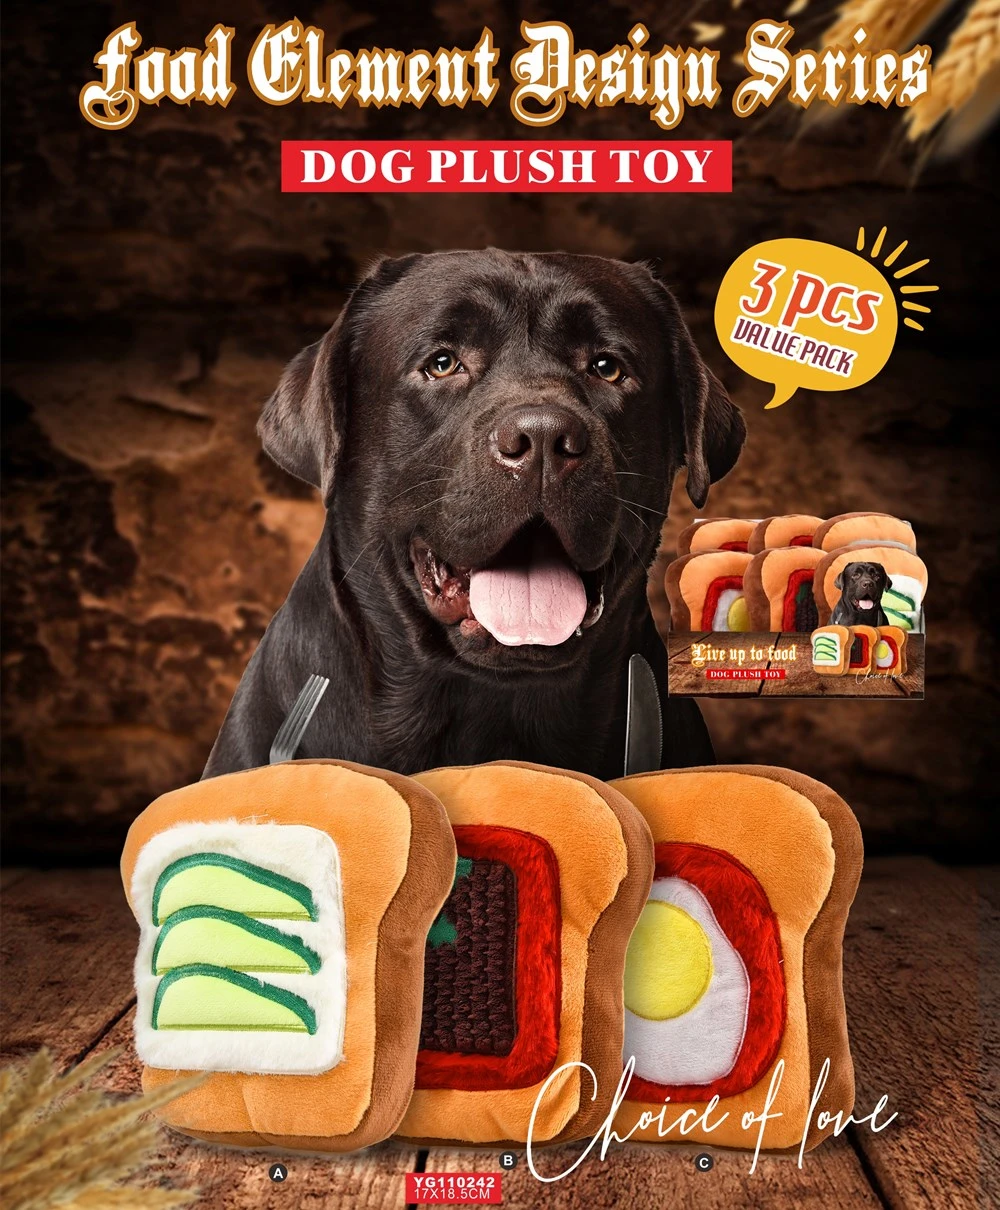 3 Pieces Food Shaped Dog Toys Plush Simulation Food Pet Chew Toy Set Suitable for Small Medium Large Dogs